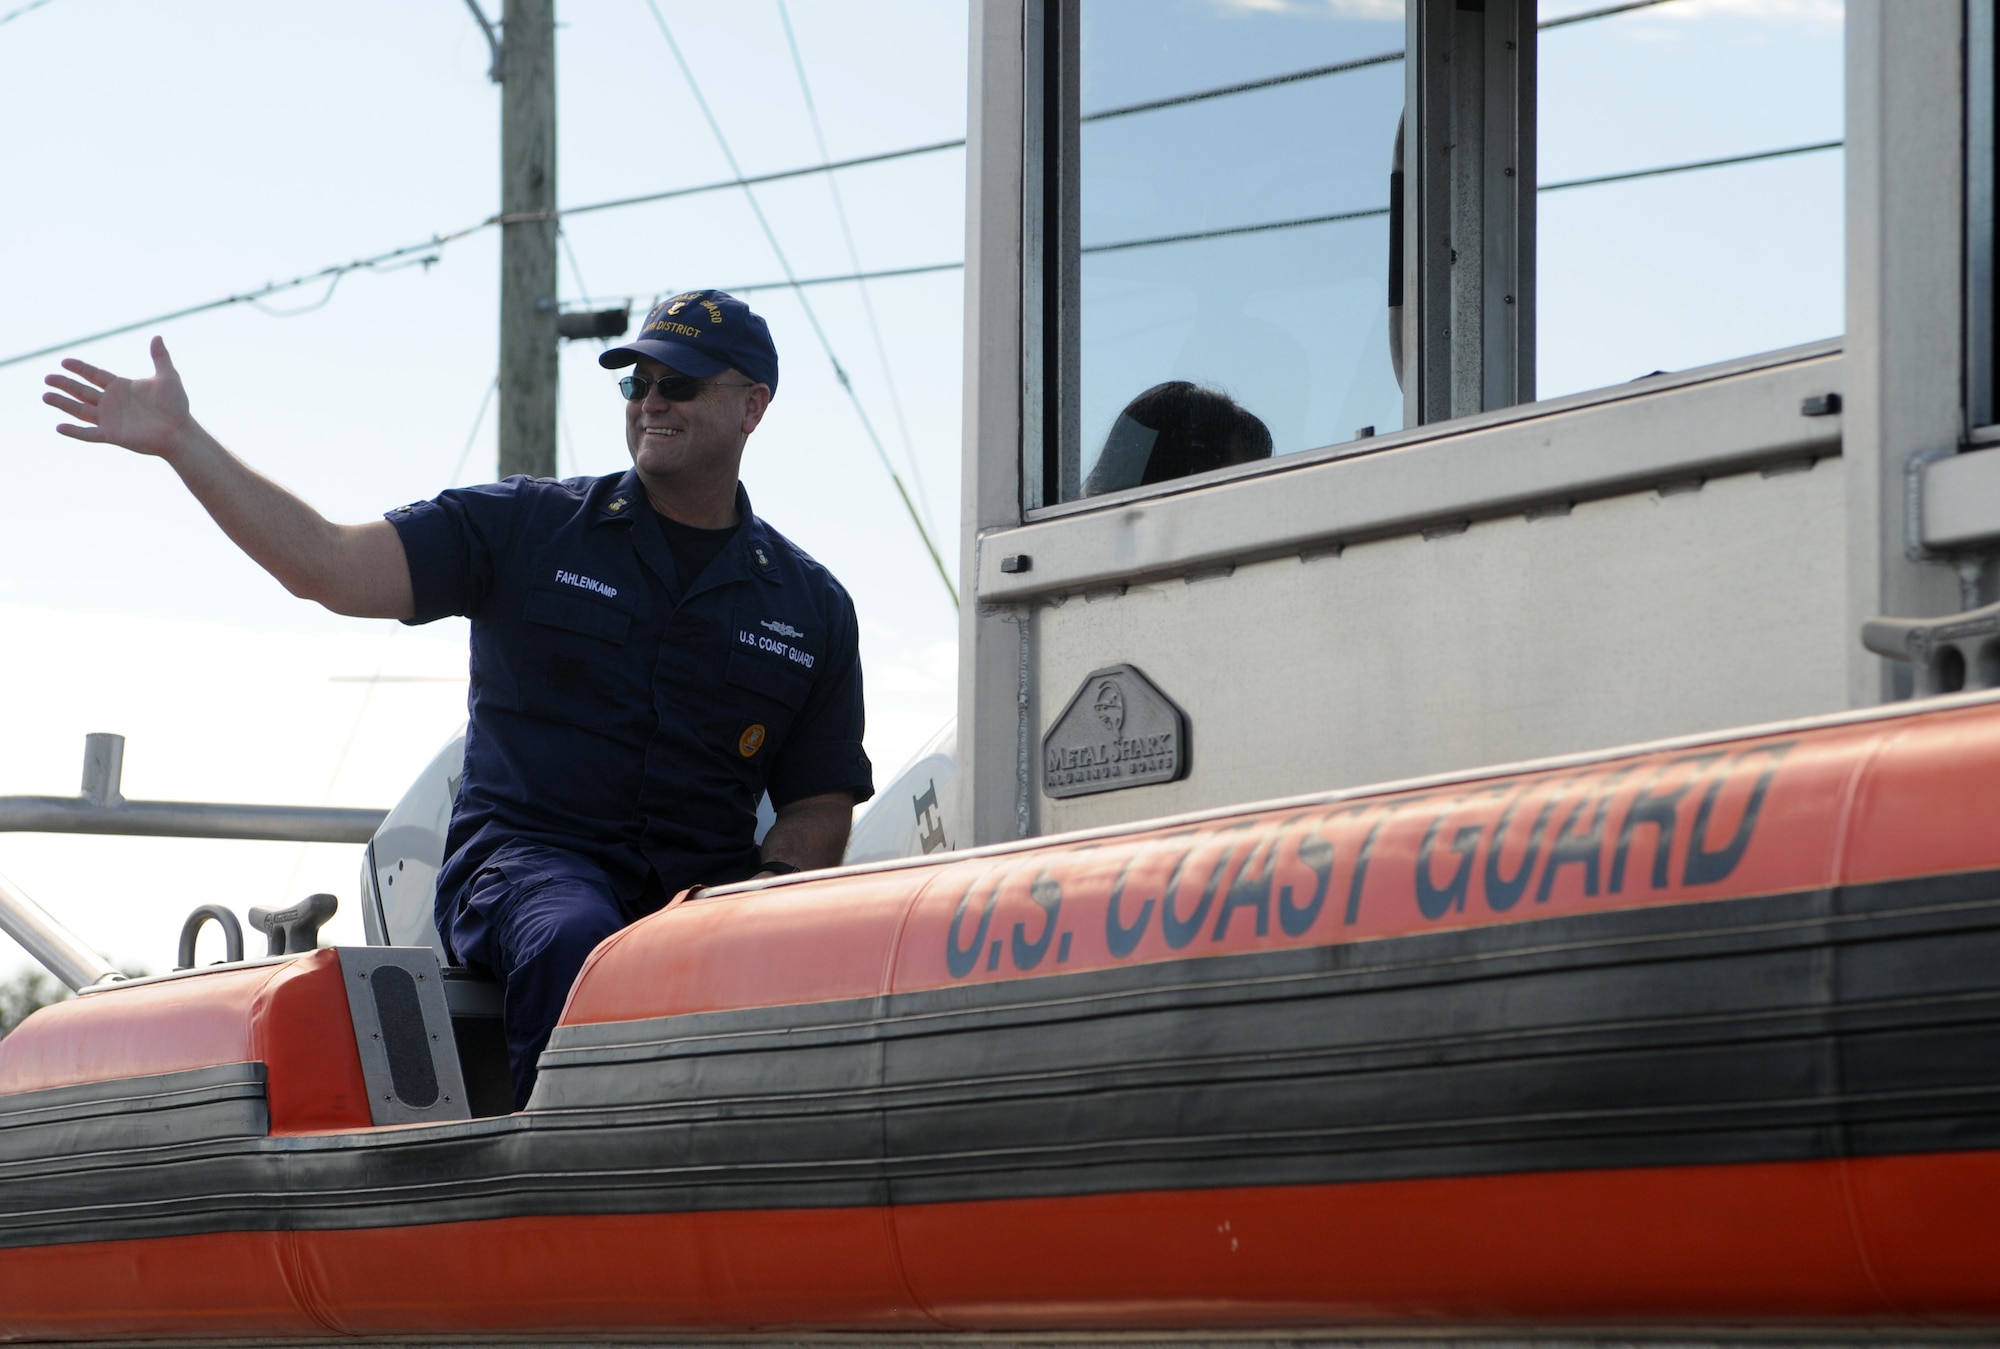 Master Chief Petty Officer Ryan Fahlenkamp, 8th Coast Guard District command master chief, waves to 16th Annual Gulf Coast Veterans Day Parade attendees Nov. 12, 2016, in D’Iberville, Miss. More than 5,000 Mississippi and Louisiana citizens watched the parade honoring Gulf Coast veterans. Keesler Honor Guard members, base leadership and more than 215 81st Training Group Airmen with the 50 State Flag Team and Drum and Bugle Corps also came out to celebrate the holiday. (U.S. Air Force photo by Senior Airman Holly Mansfield)